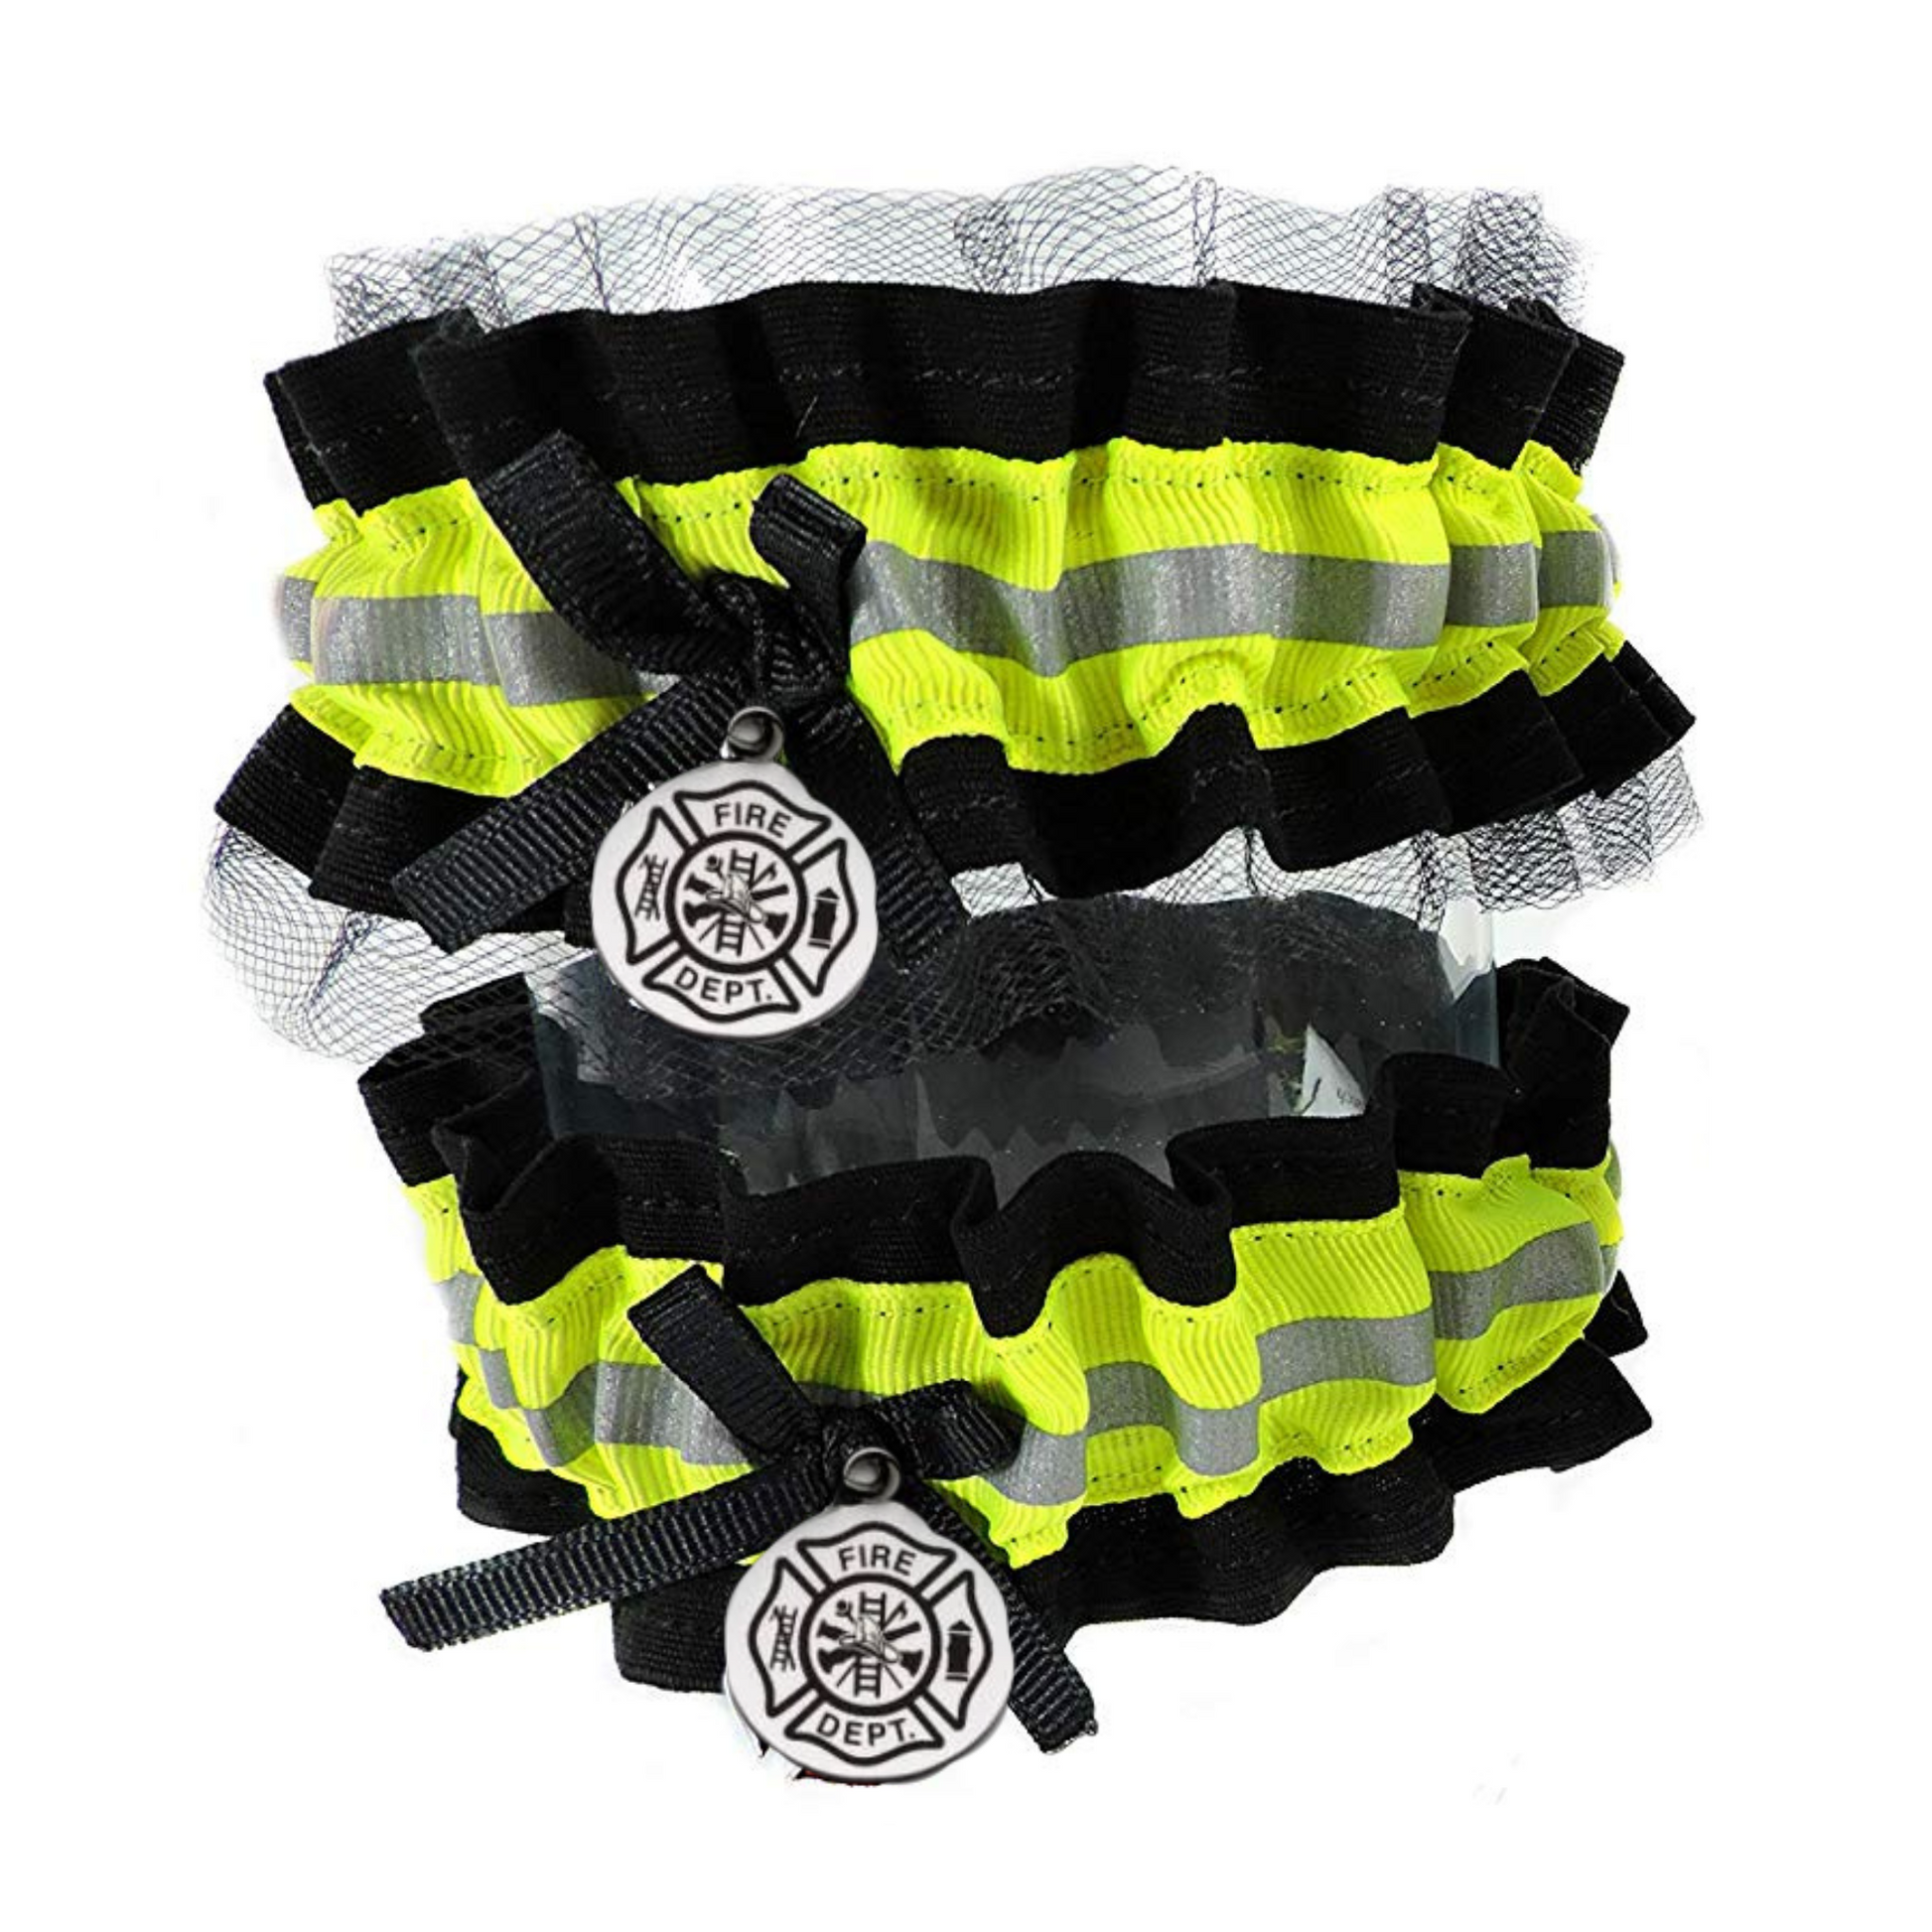 Firefighter wedding garter set, one with black tulle, toss garter without tulle Black fabric and neon yellow reflective tape